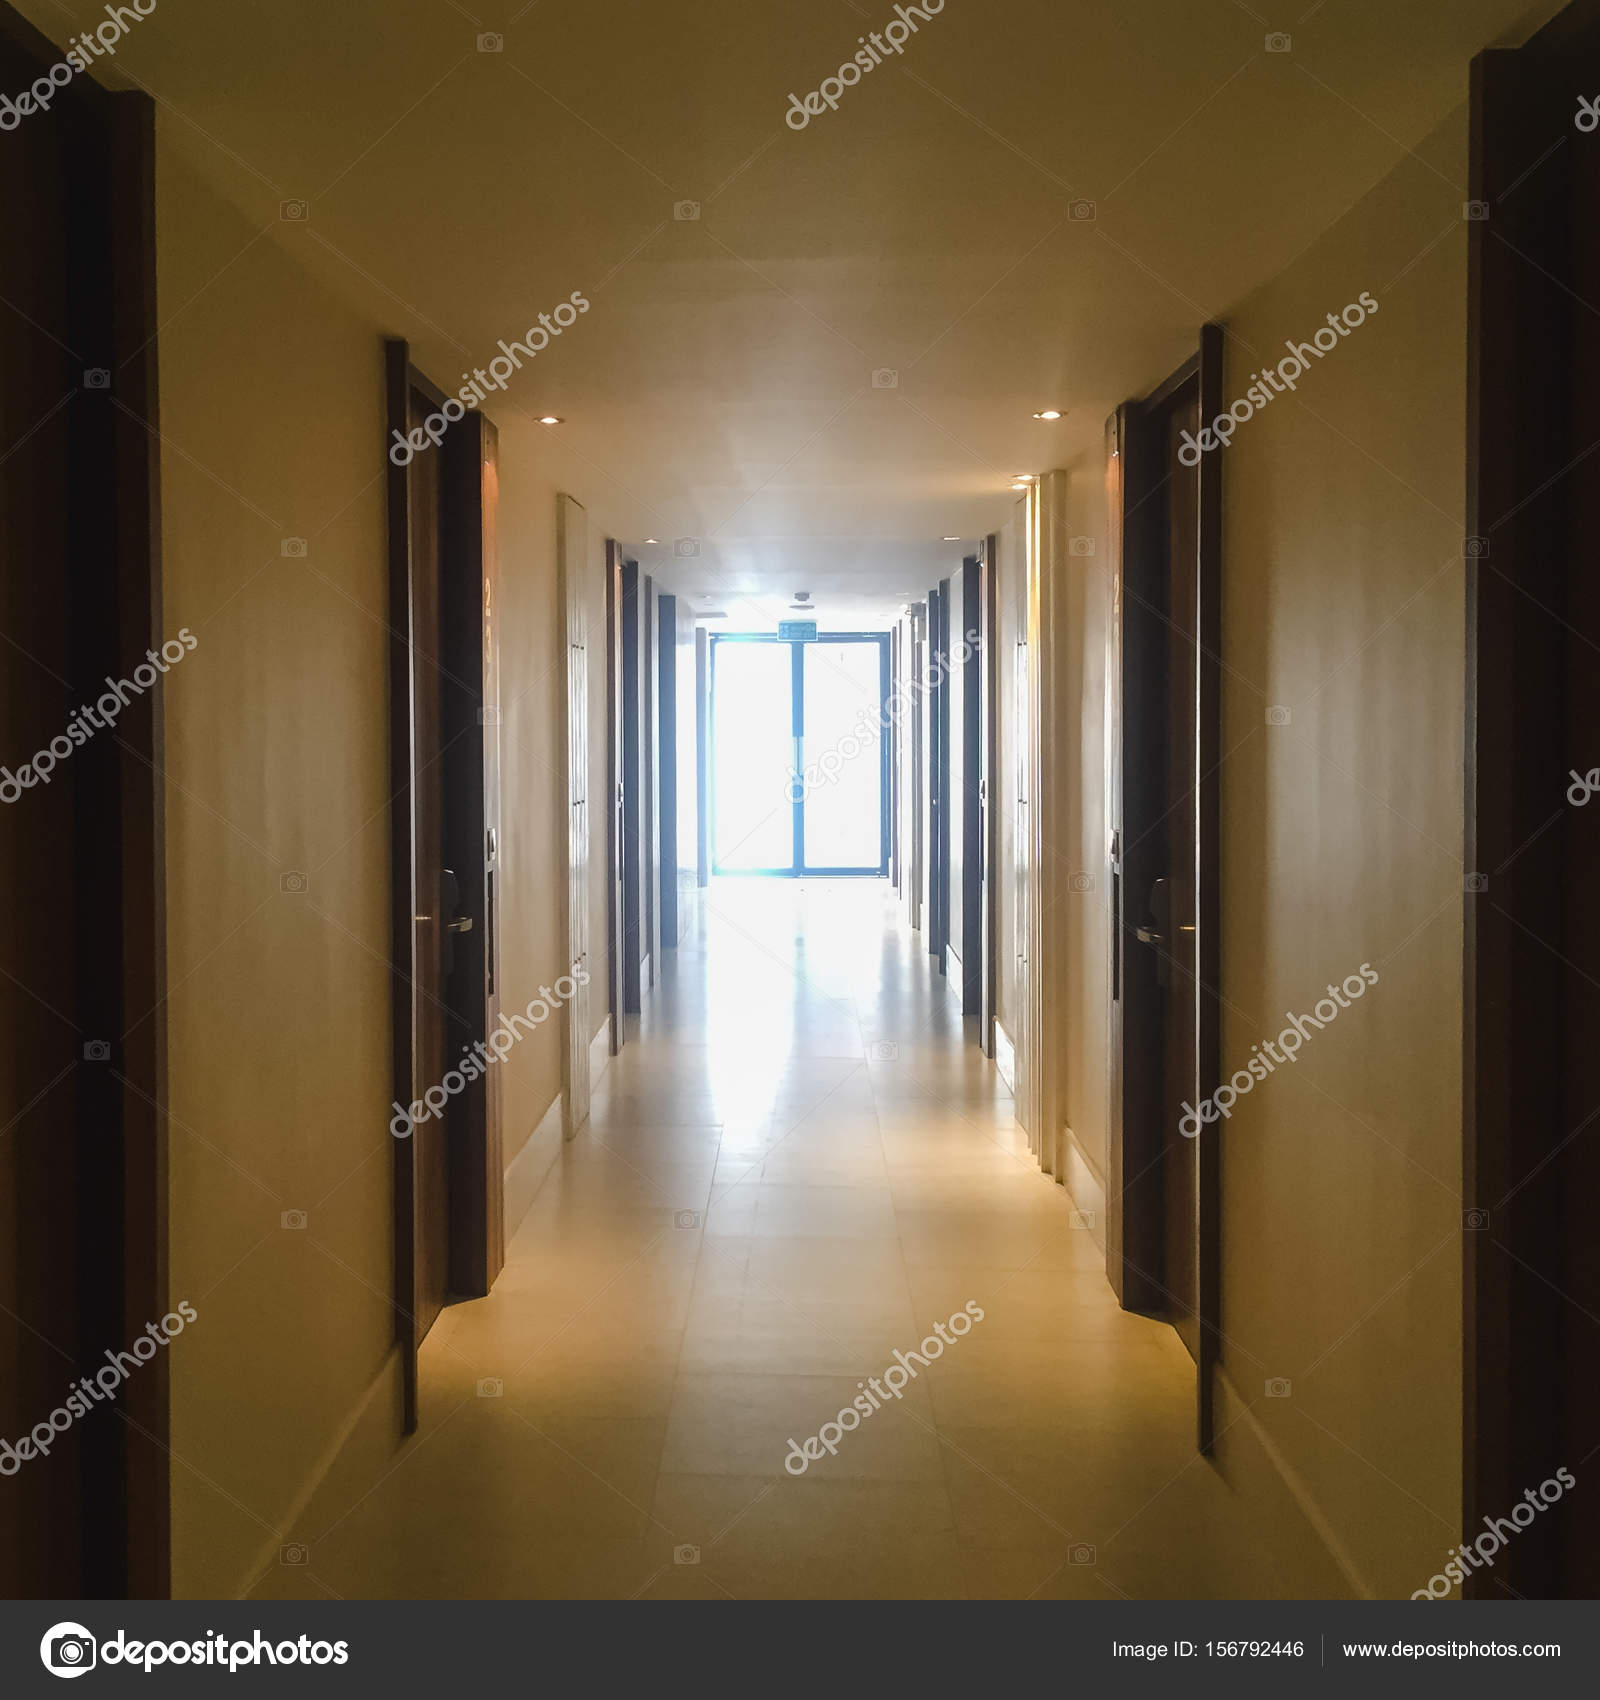 Light Brown House With Dark Brown Trim Corridor With Lots